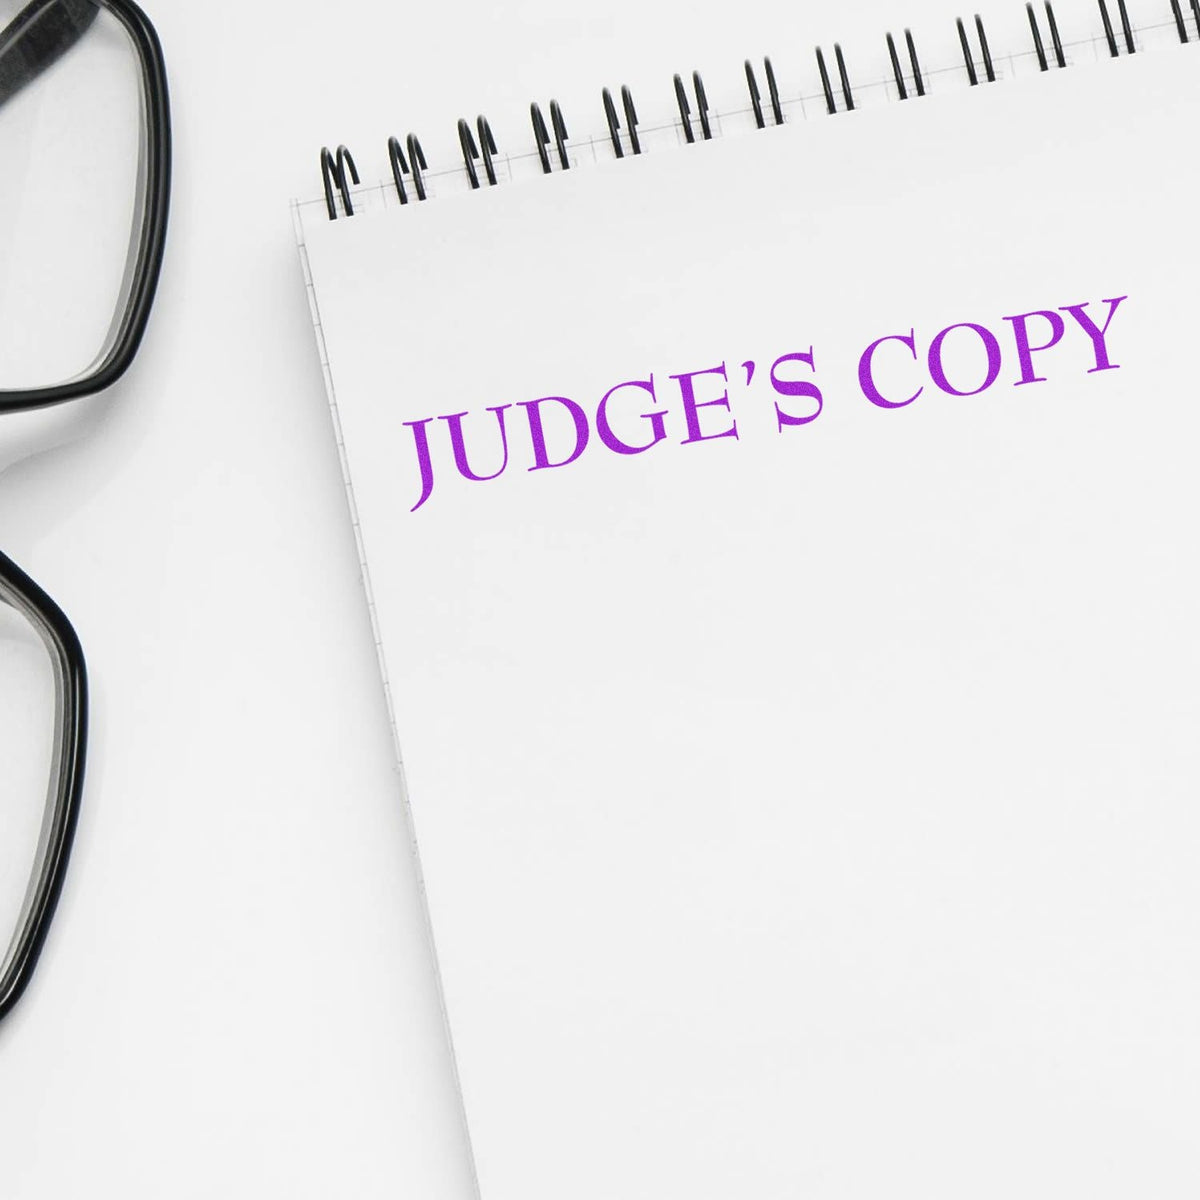 Large Judges Copy Rubber Stamp In Use